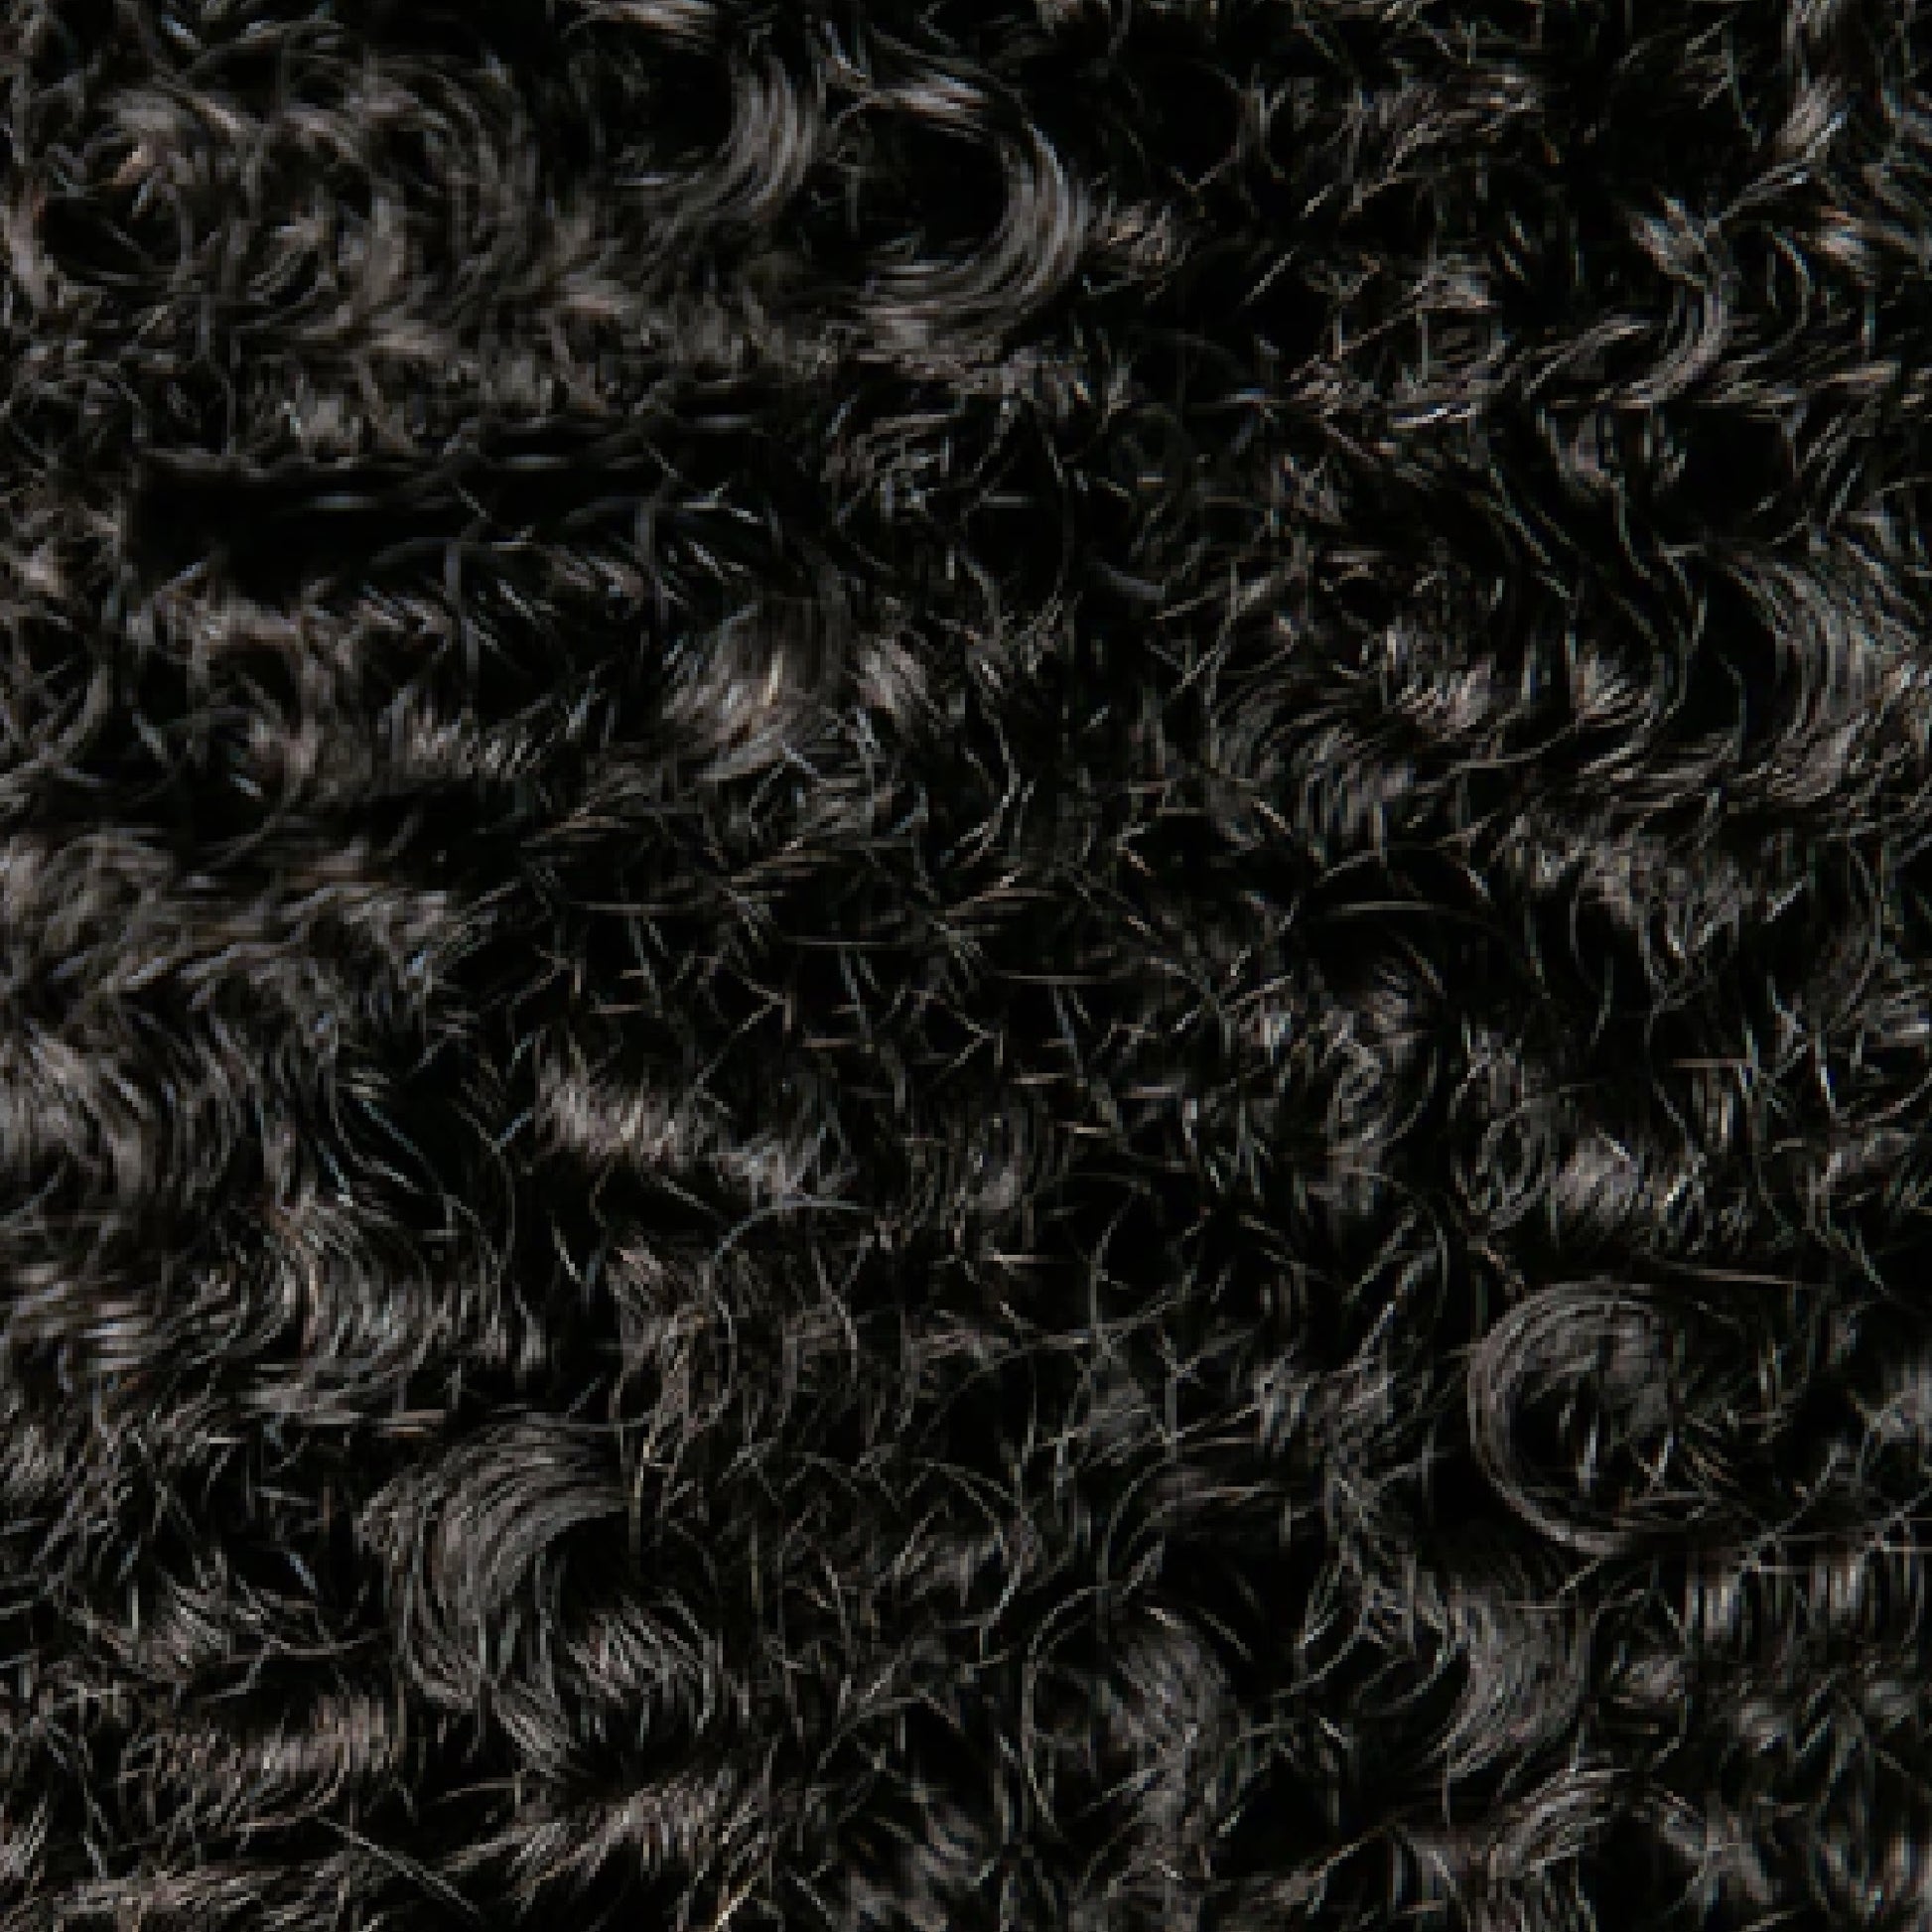 Afro kinky curly hair texture swatch